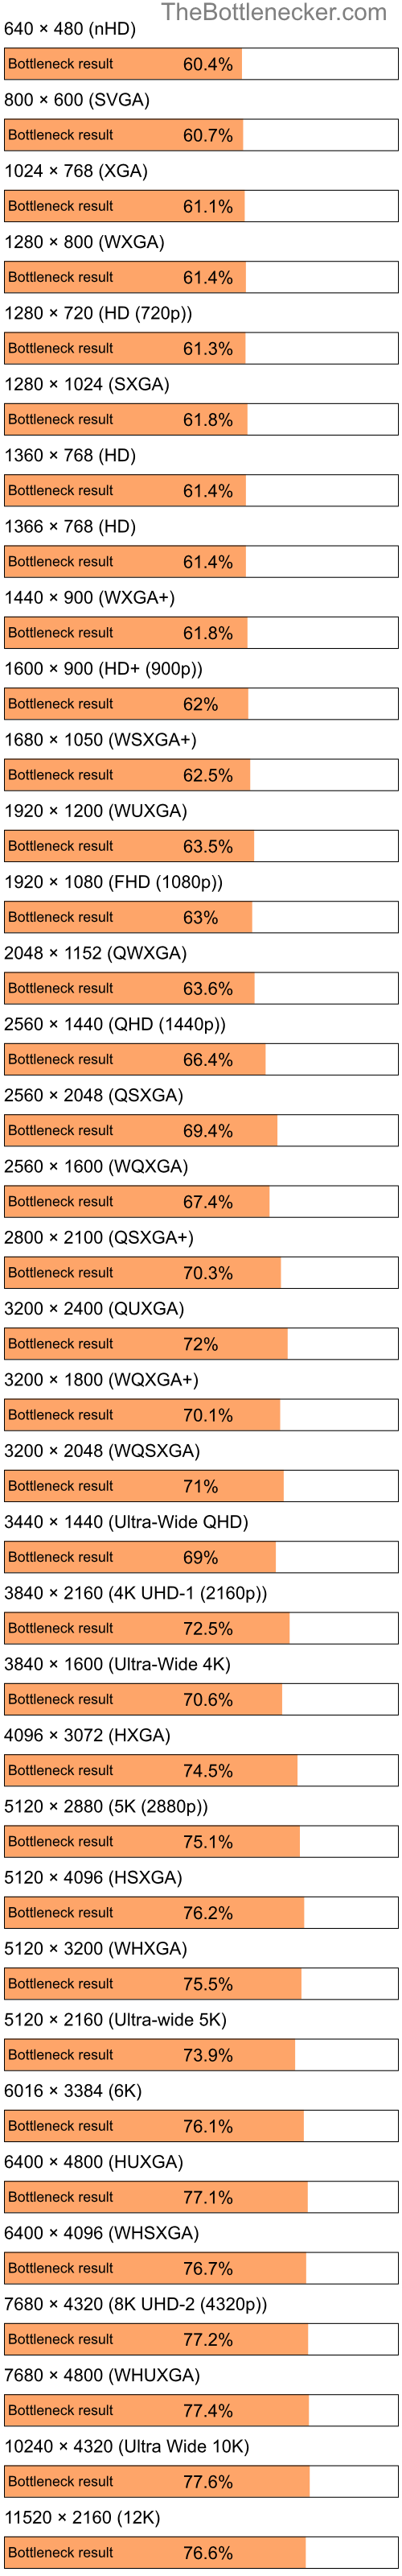 Bottleneck results by resolution for Intel Celeron M 410 and AMD Mobility Radeon HD 4225 in Processor Intense Tasks